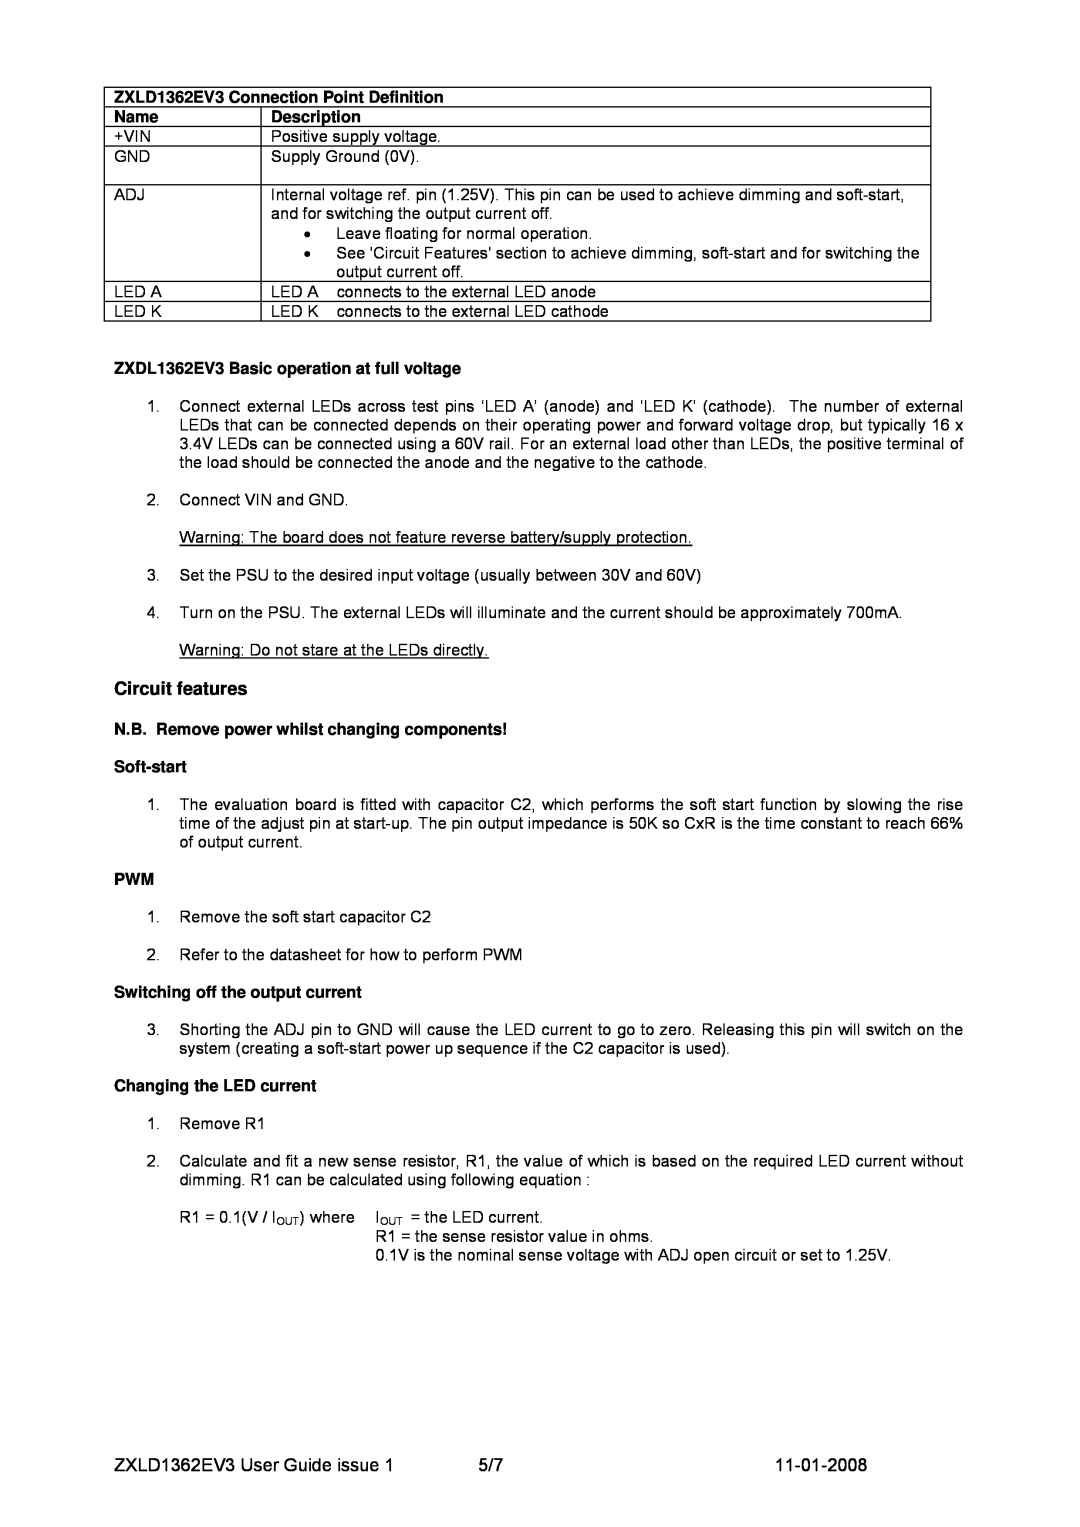 Zetex Semiconductors PLC manual Circuit features, ZXLD1362EV3 User Guide issue, 11-01-2008 